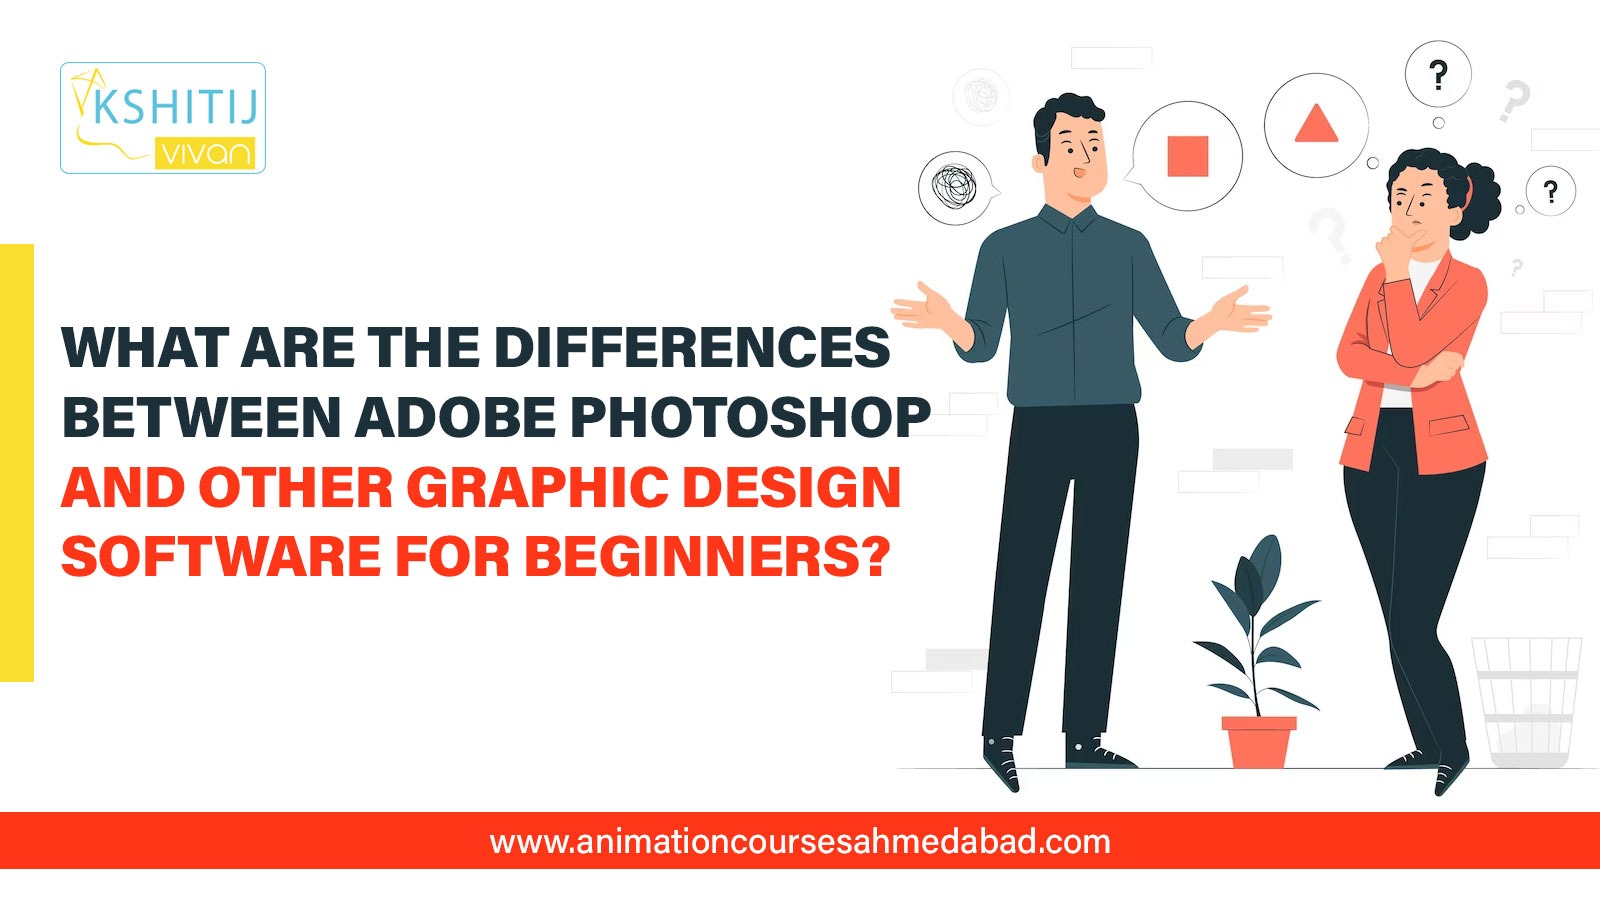 What are the differences between Adobe Photoshop and other graphic design software for beginners?